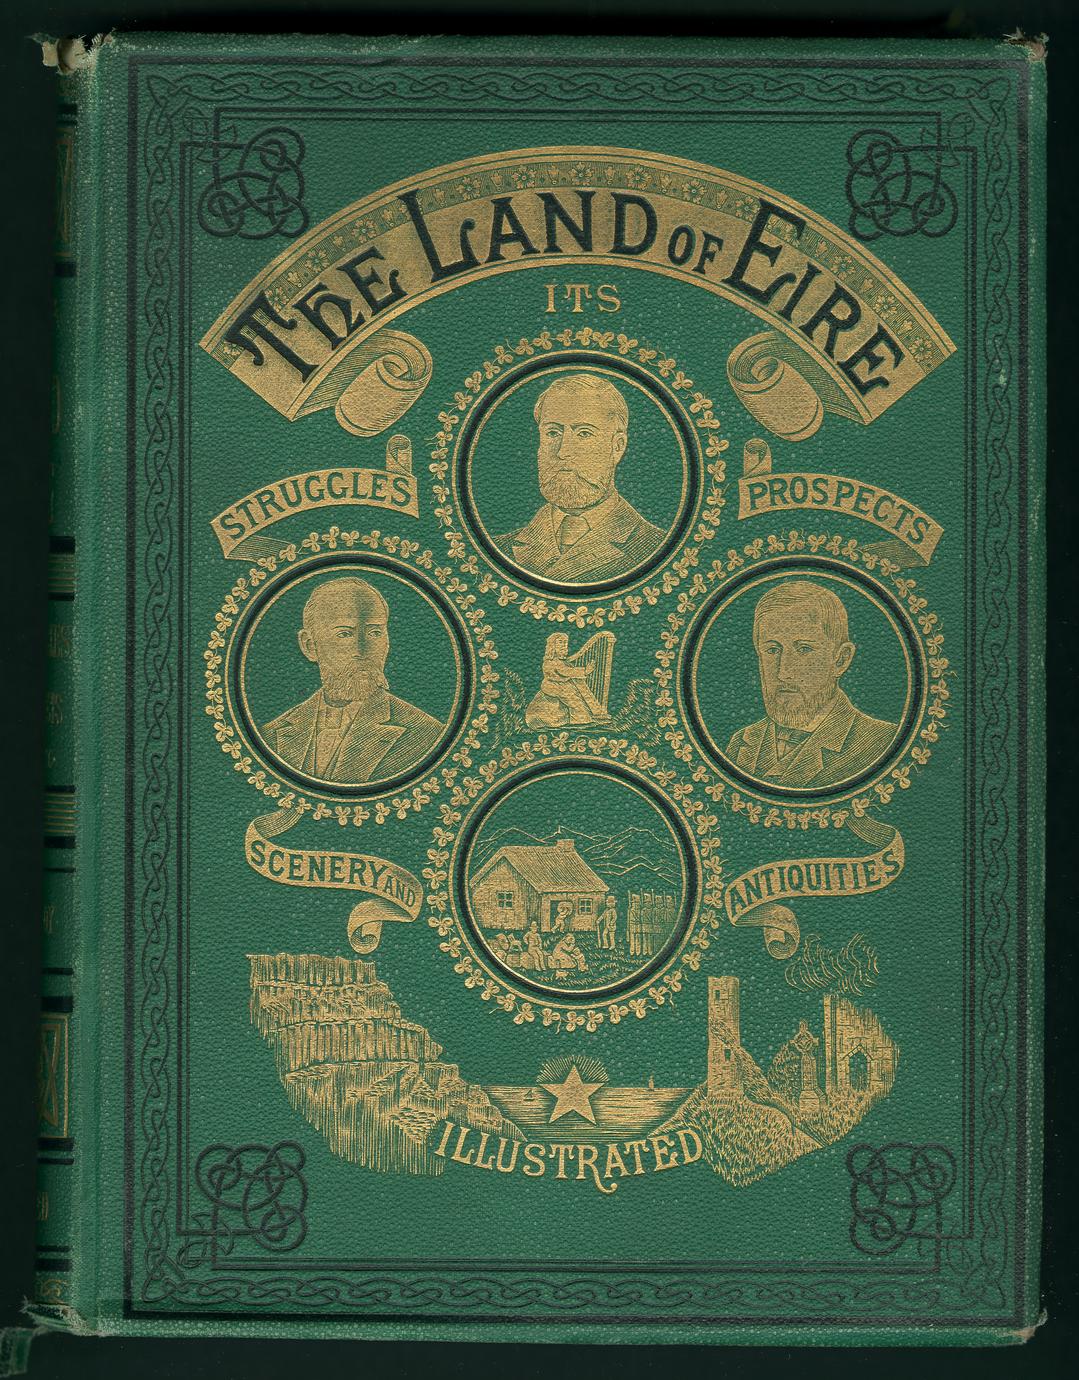 The land of Eire (1 of 2)